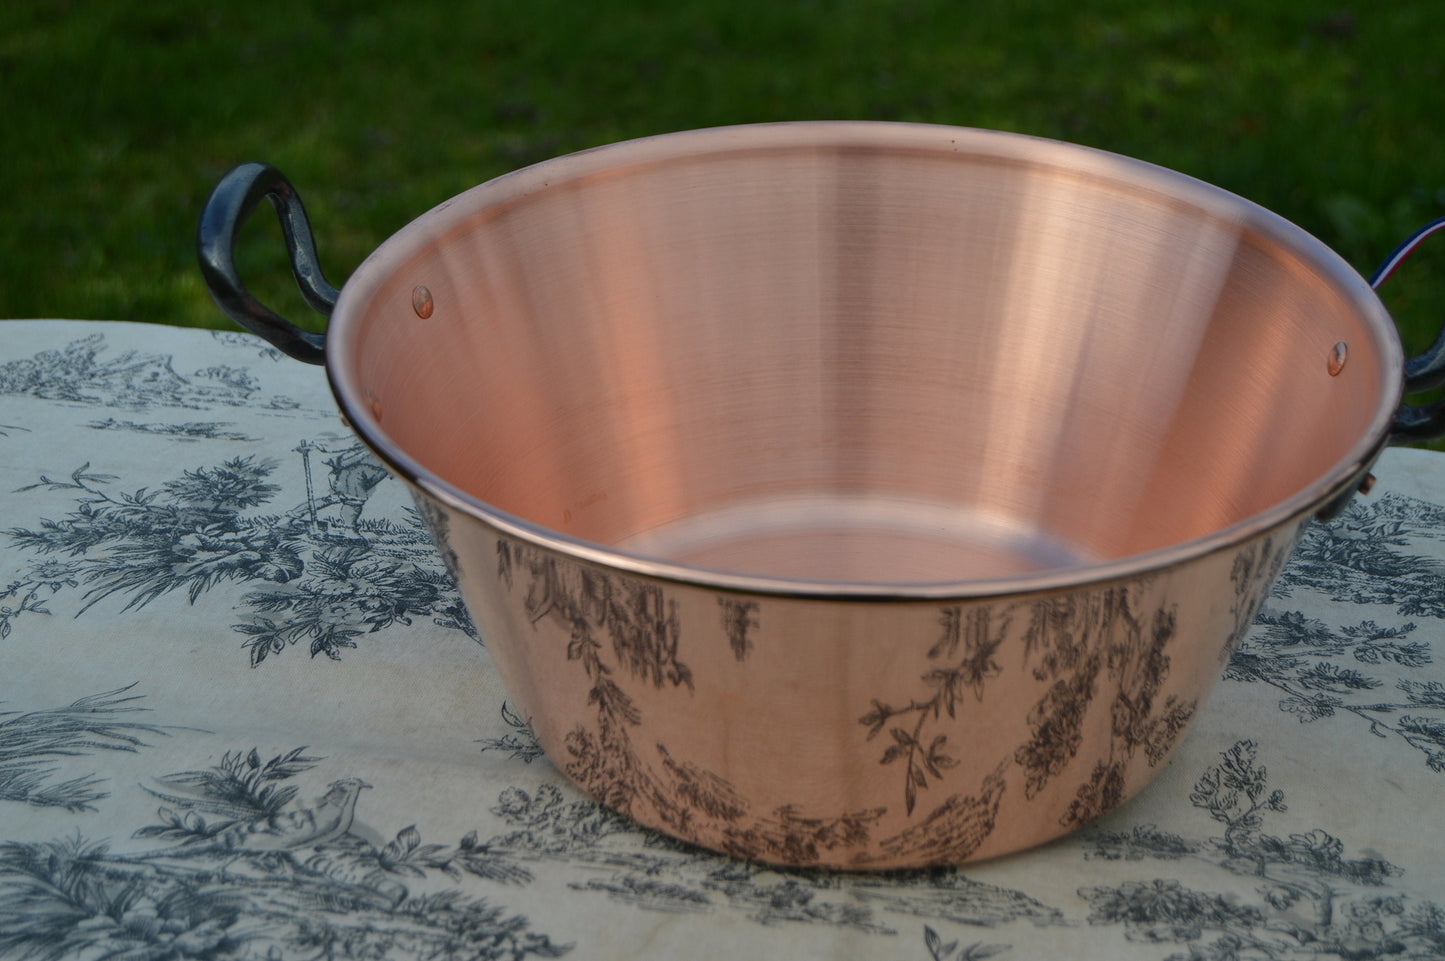 New NKC 28cm Copper Jam Pan with Ecumoire Skimmer NKC Normandy Kitchen Copper Jam Jelly 28cm 11" Rolled Top Iron Handles Normandy Kitchen